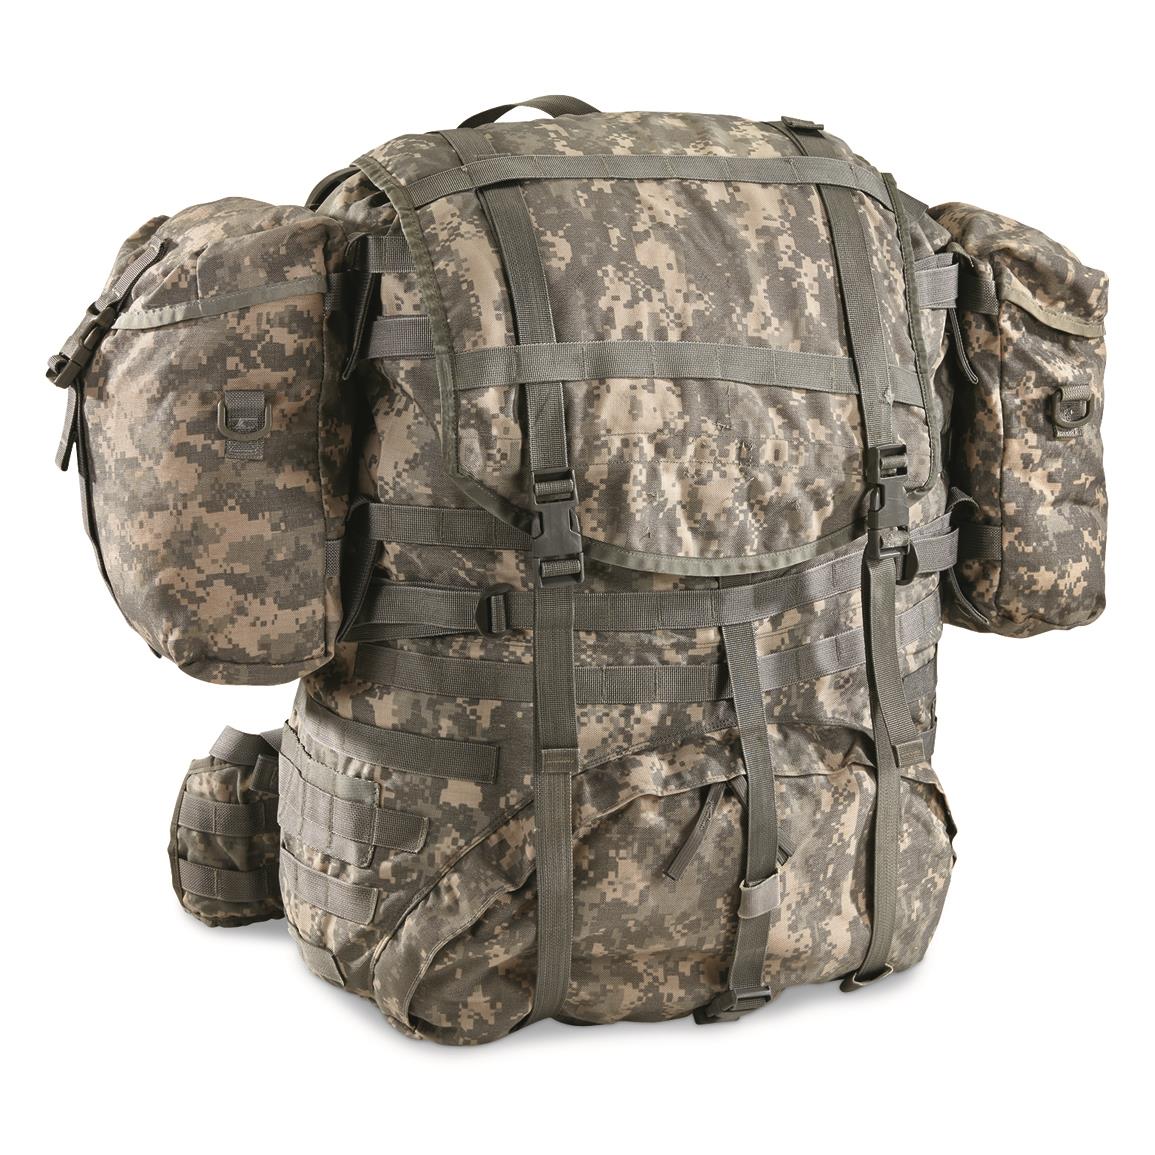 Massive 4,000-cu. in capacity, with MOLLE straps for attaching additional gear